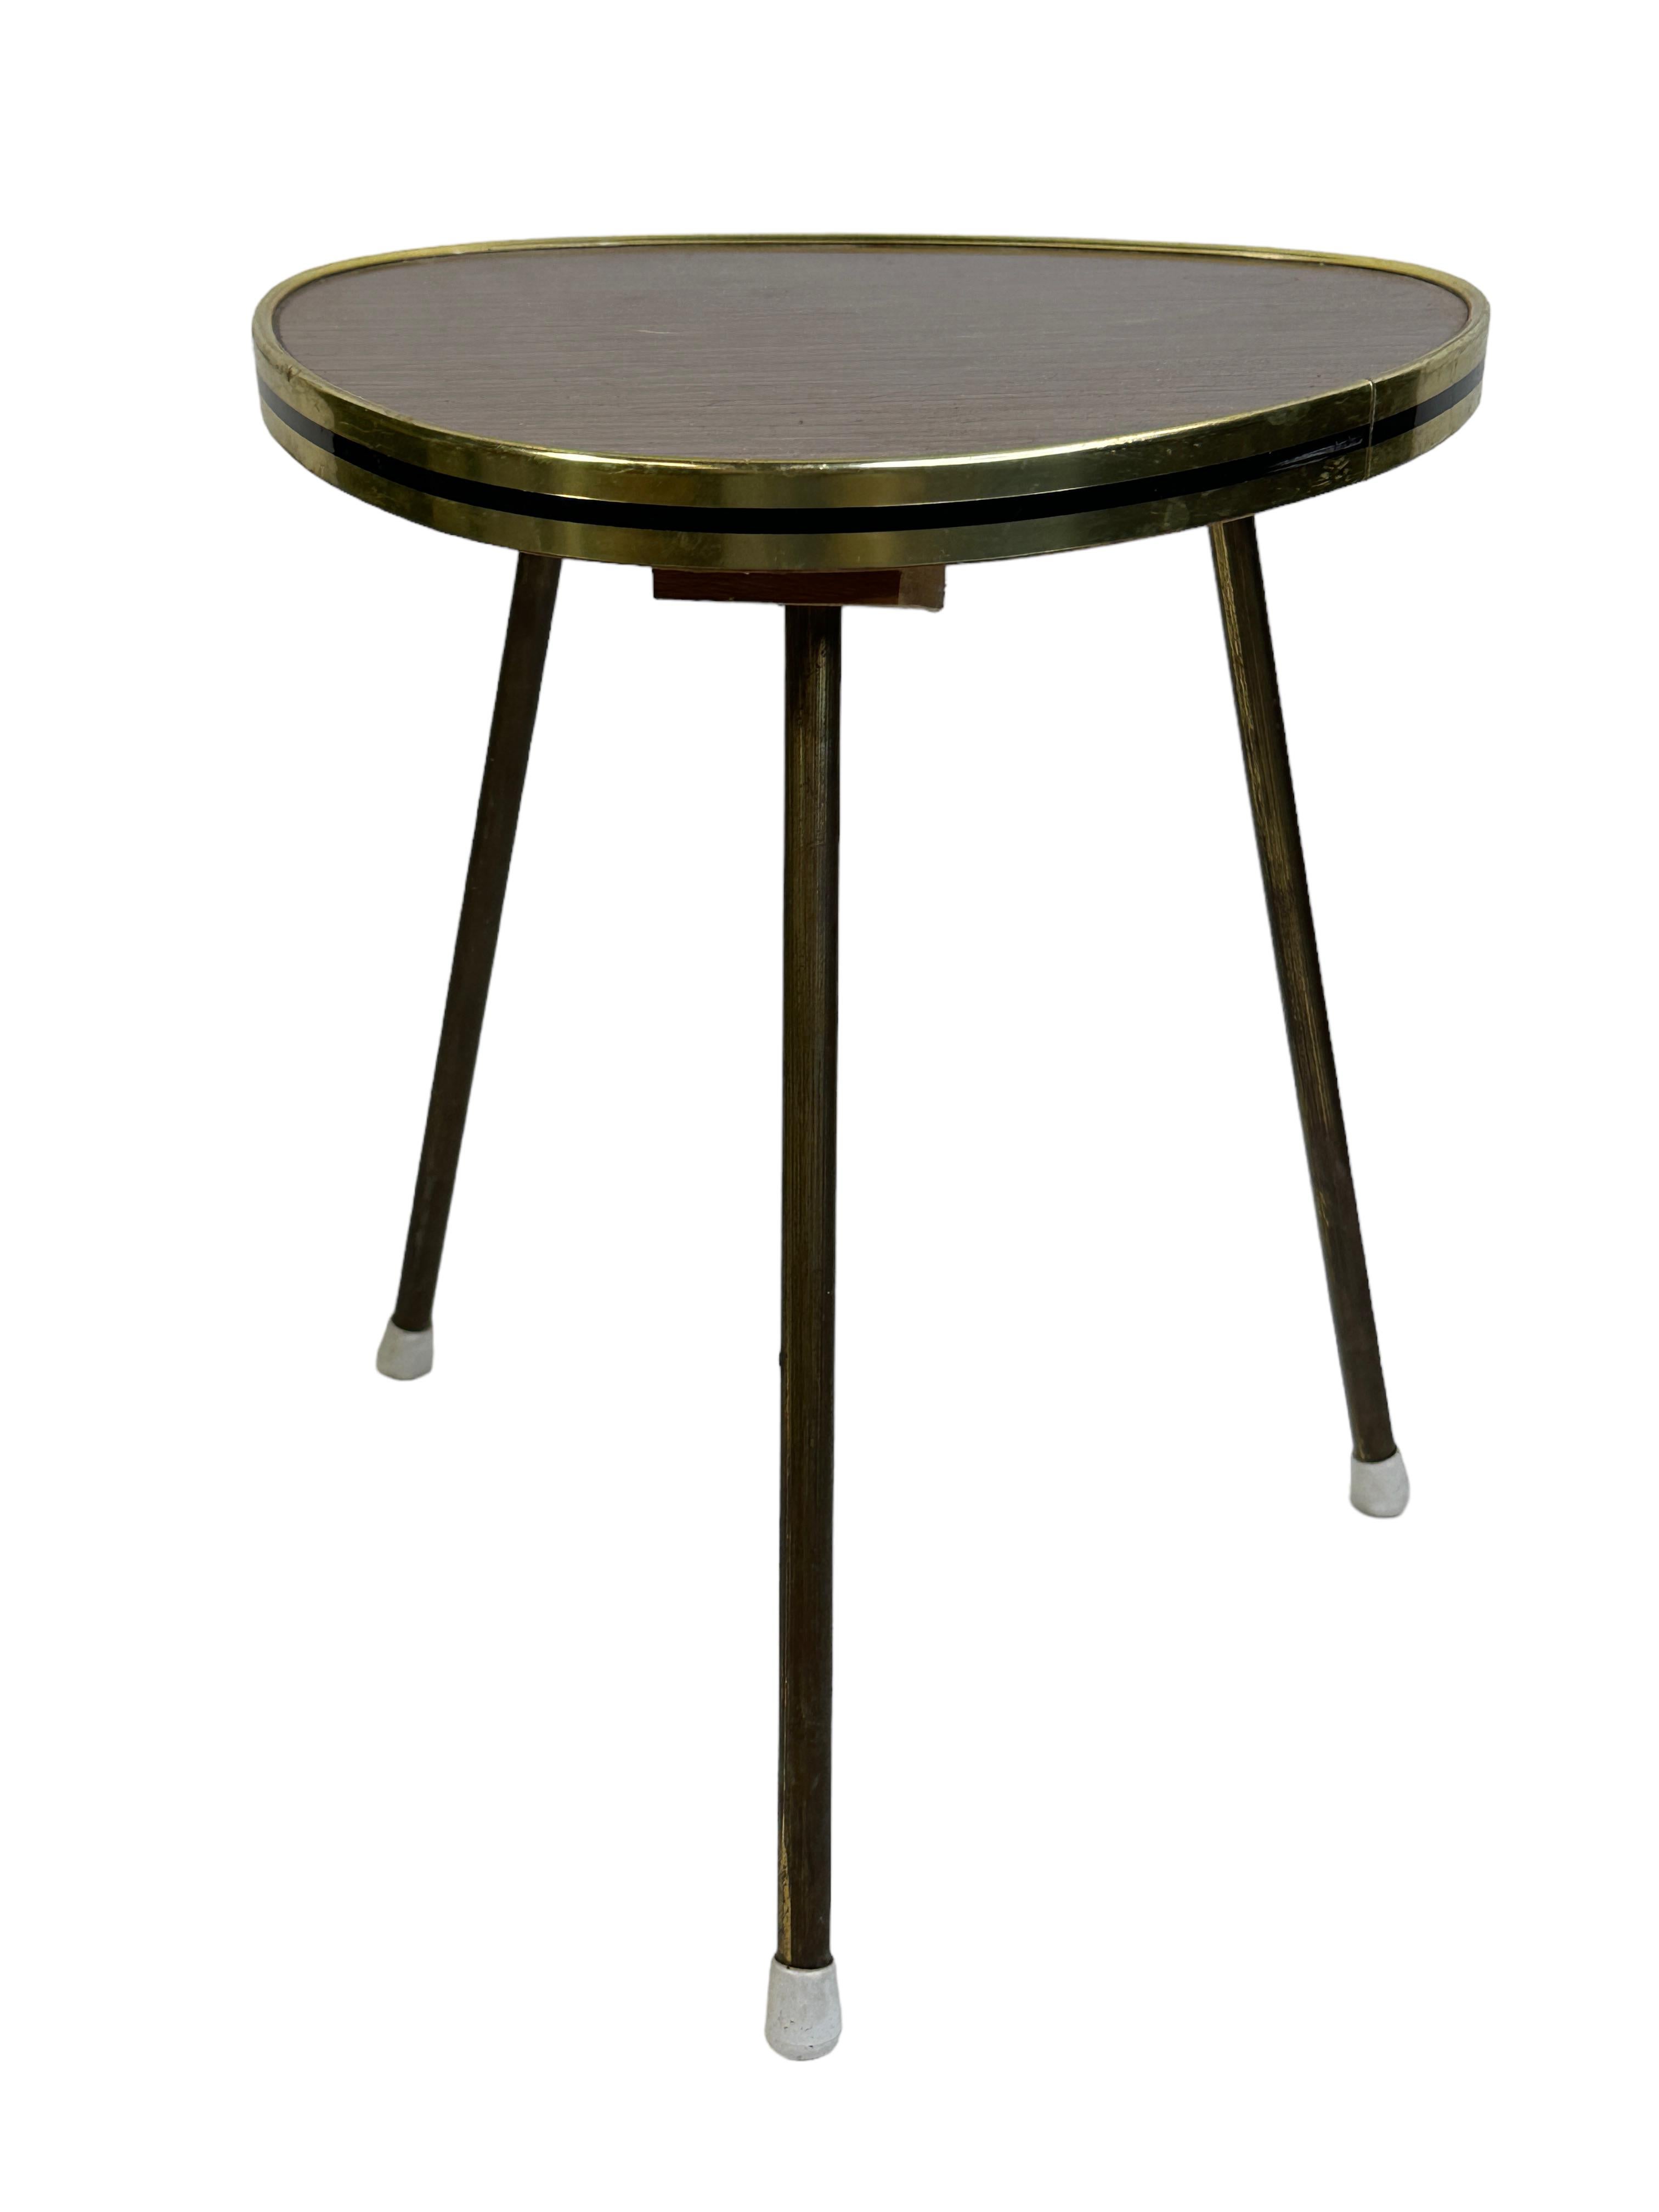 Mid-20th Century Small Tripod Flower Table or Vintage Plant Holder Stand, 1950s Mid Century For Sale